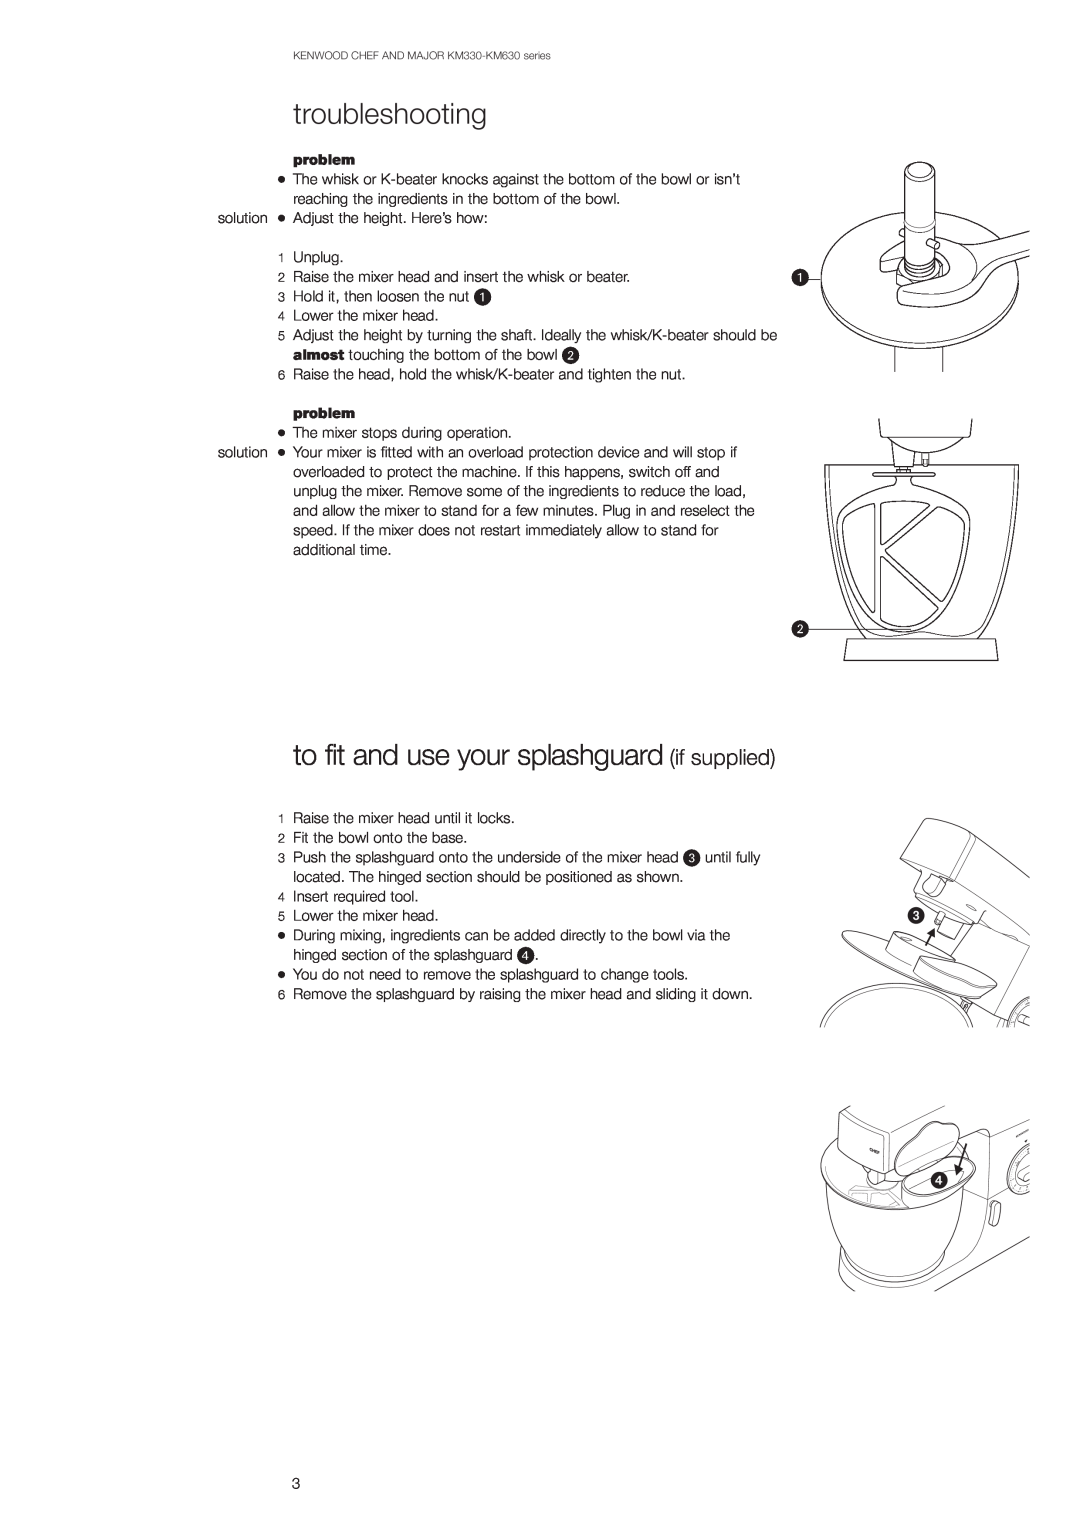 Kenwood Chef KM330 series/Major KM630 series manual troubleshooting, to fit and use your splashguard if supplied, problem 